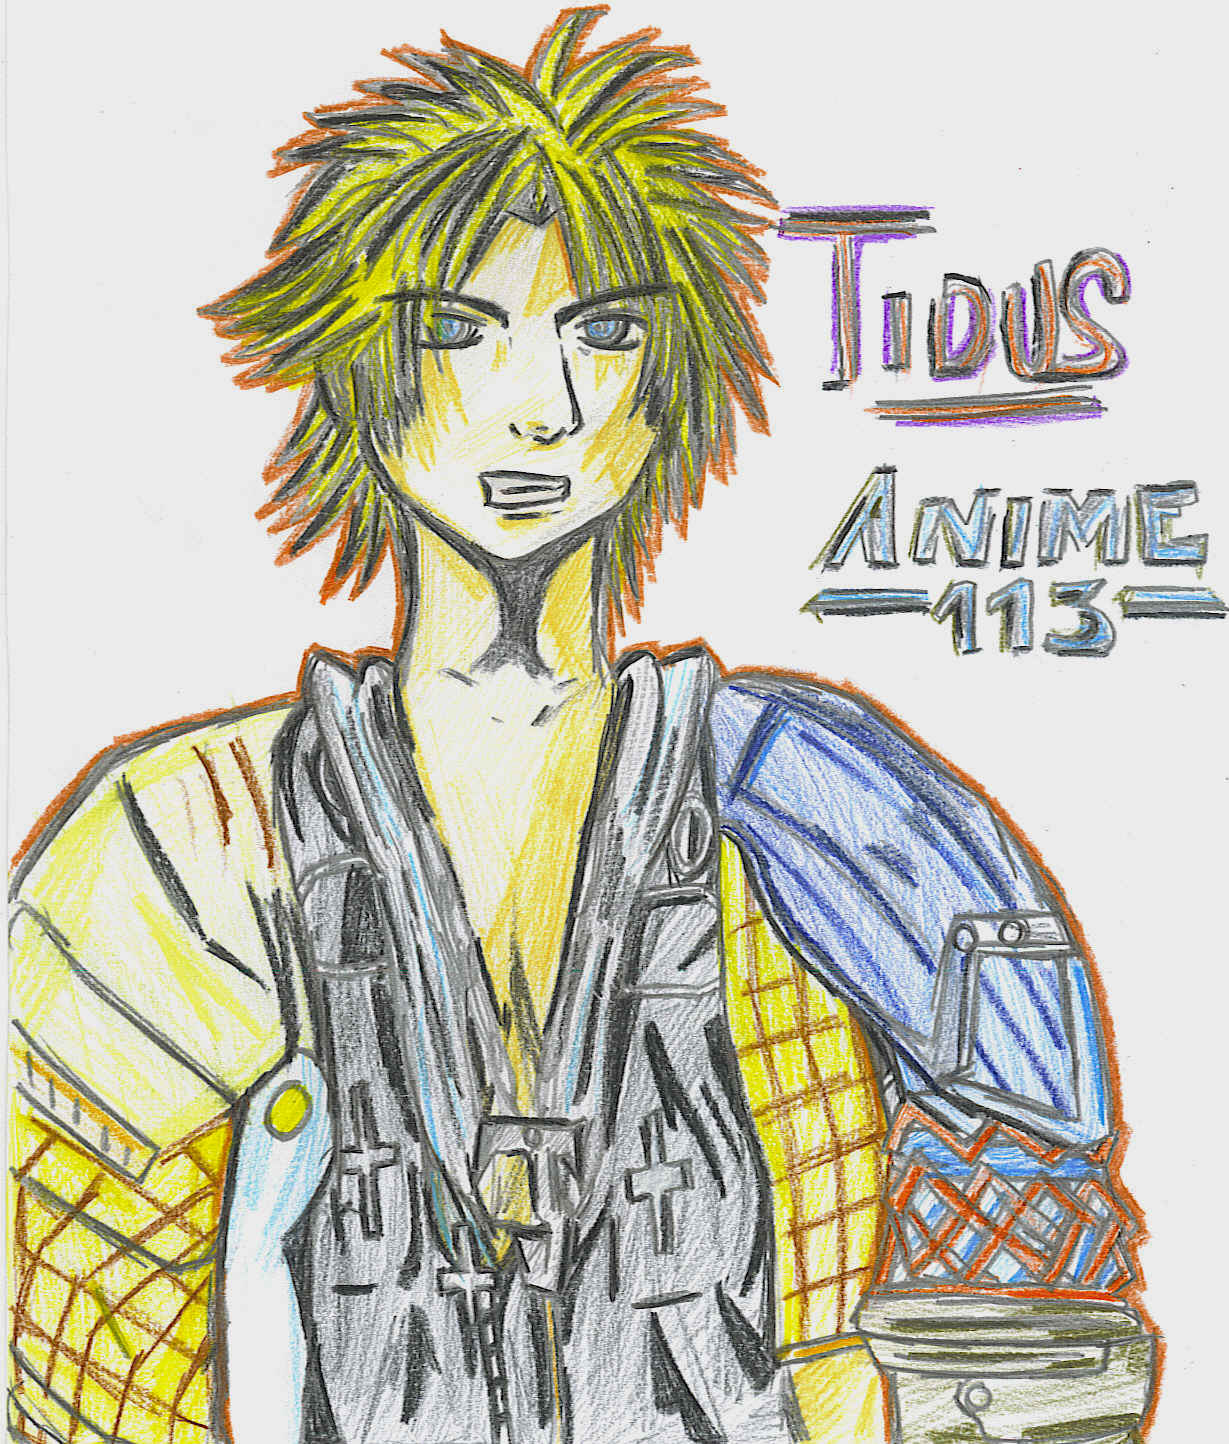 tidus by anime113